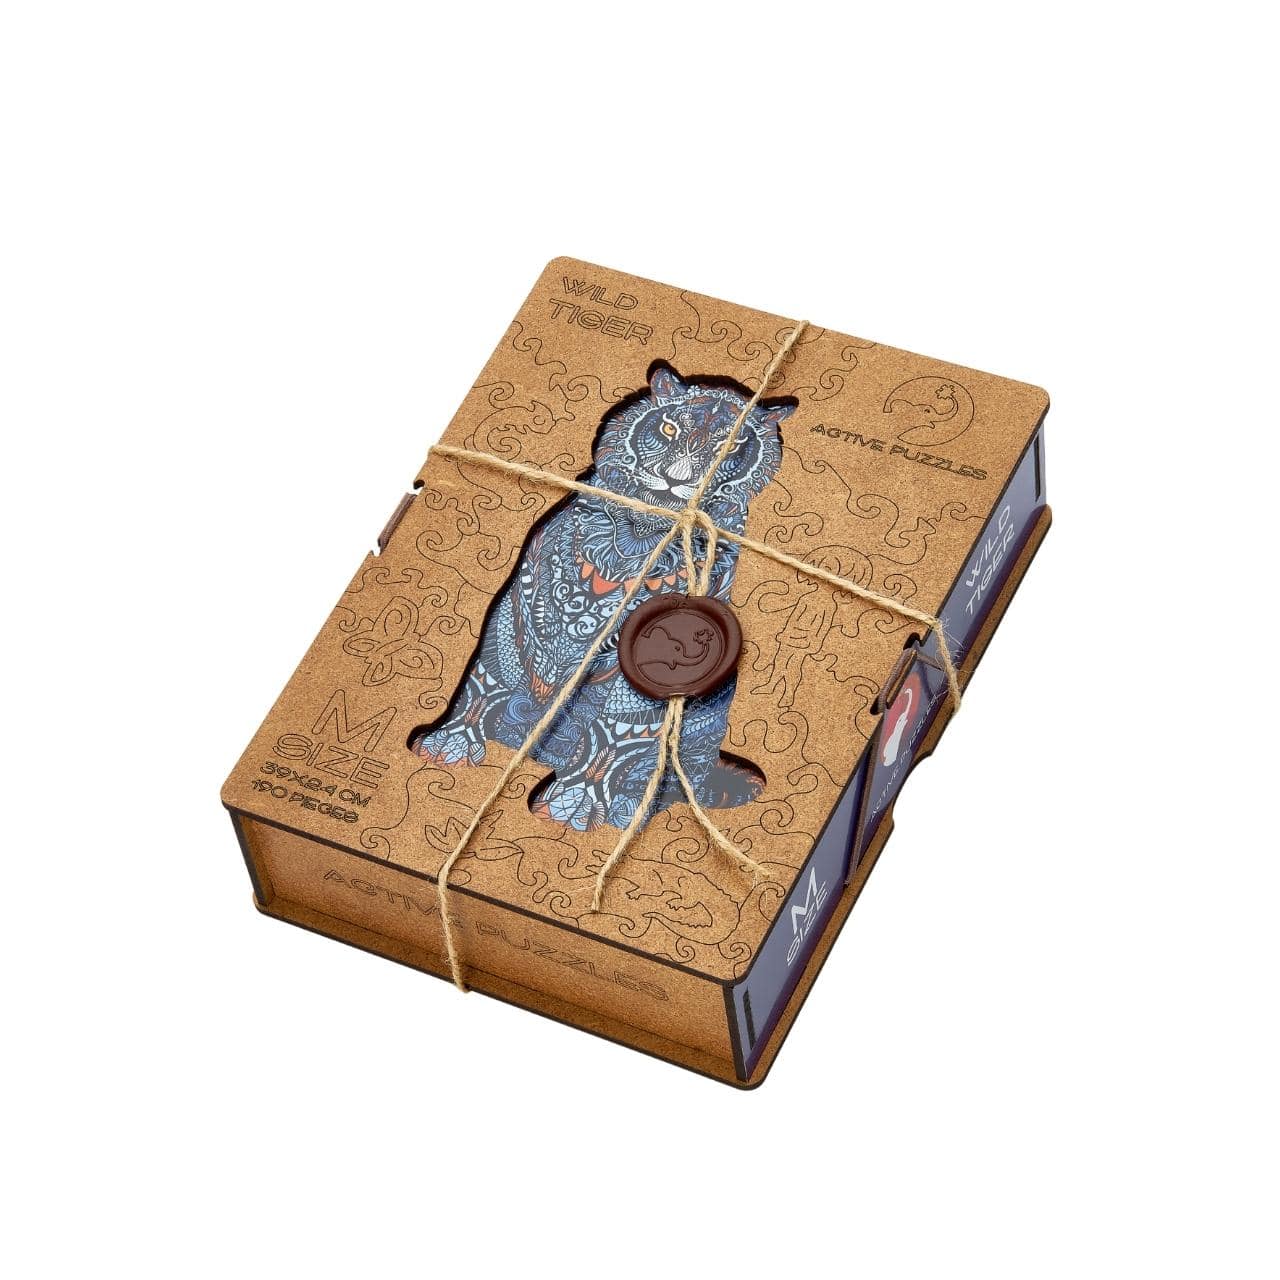 Bound Tiger Wooden Puzzles Box